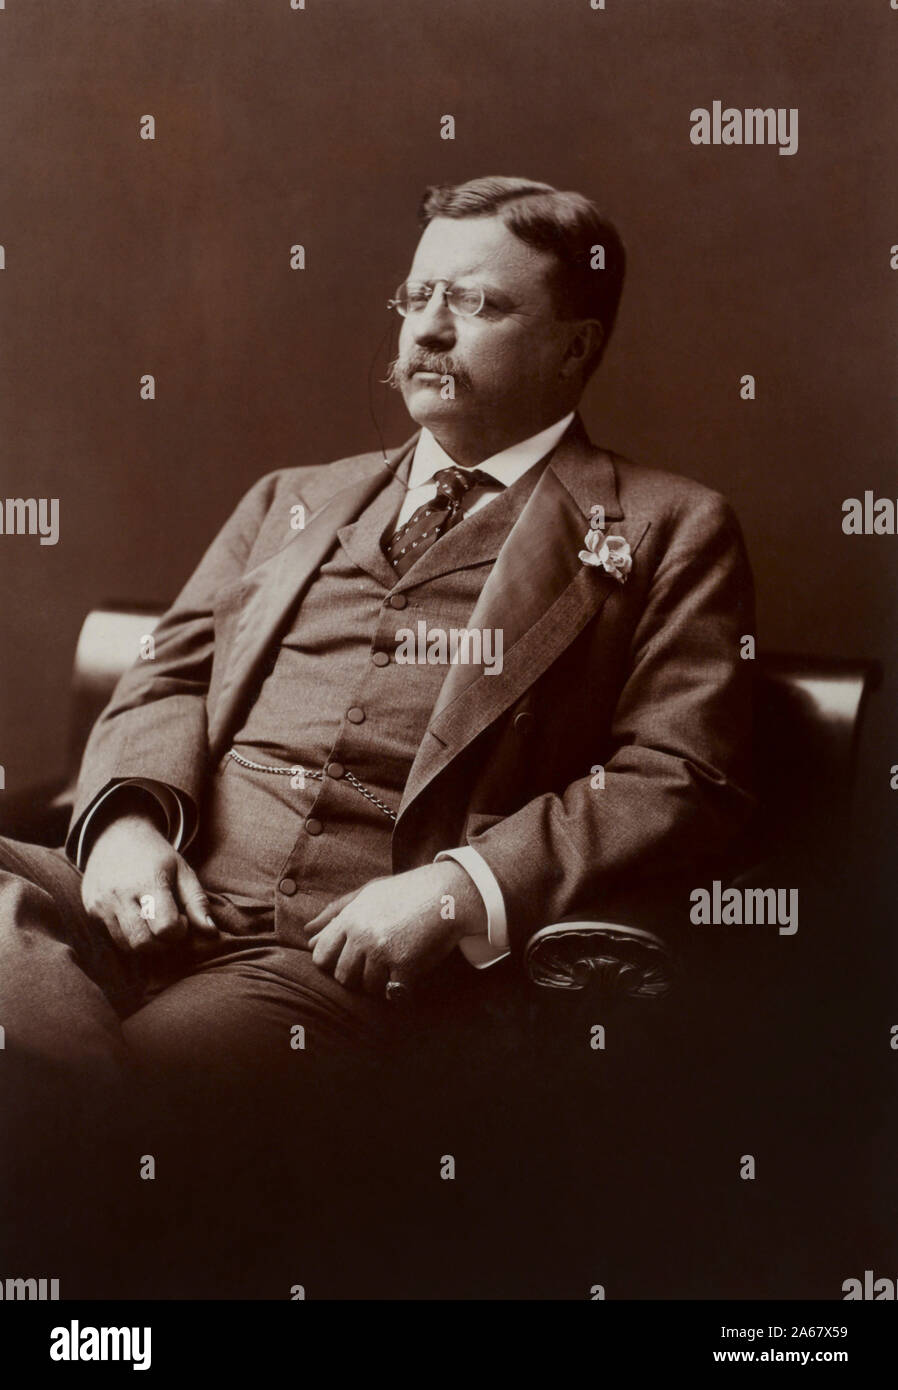 Theodore Roosevelt (1858-1919), 26th President of the United States 1901-09, Three-Quarter Length Seated Portrait, Photograph by Barnett McFee Clinedinst, 1906 Stock Photo